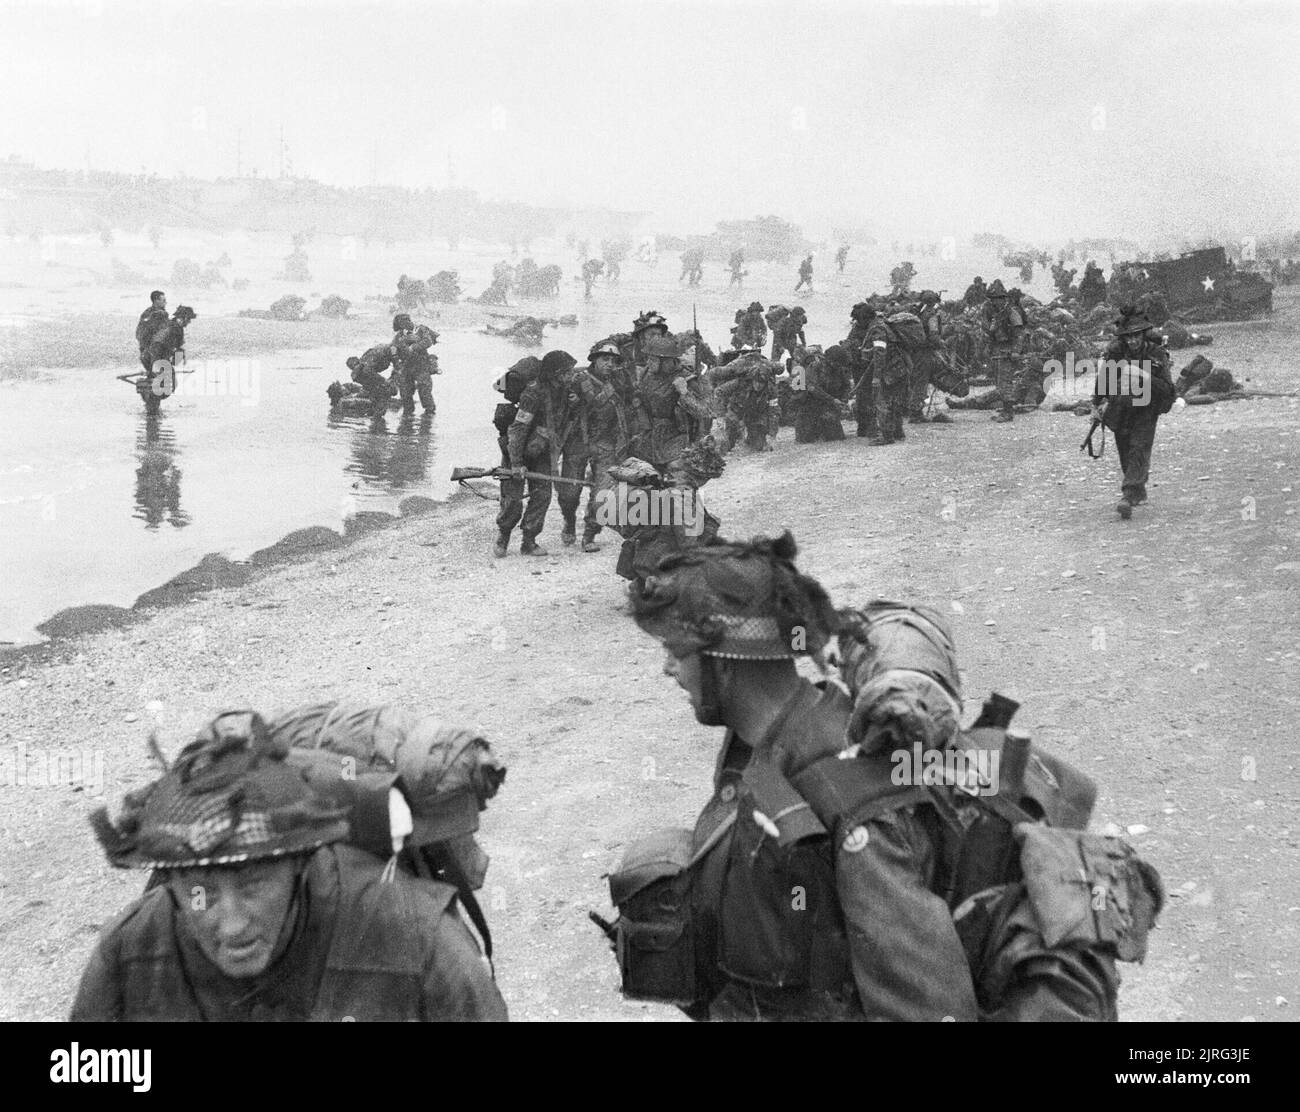 D-day - British Forces during the Invasion of Normandy 6 June 1944 Troops of 3rd Infantry Division on Queen Red beach, Sword area, circa 0845 hrs, 6 June 1944. In the foreground are sappers of 84 Field Company Royal Engineers, part of No.5 Beach Group, identified by the white bands around their helmets. Behind them, medical orderlies of 8 Field Ambulance, RAMC, can be seen assisting wounded men. In the background commandos of 1st Special Service Brigade can be seen disembarking from their LCI(S) landing craft. Stock Photo